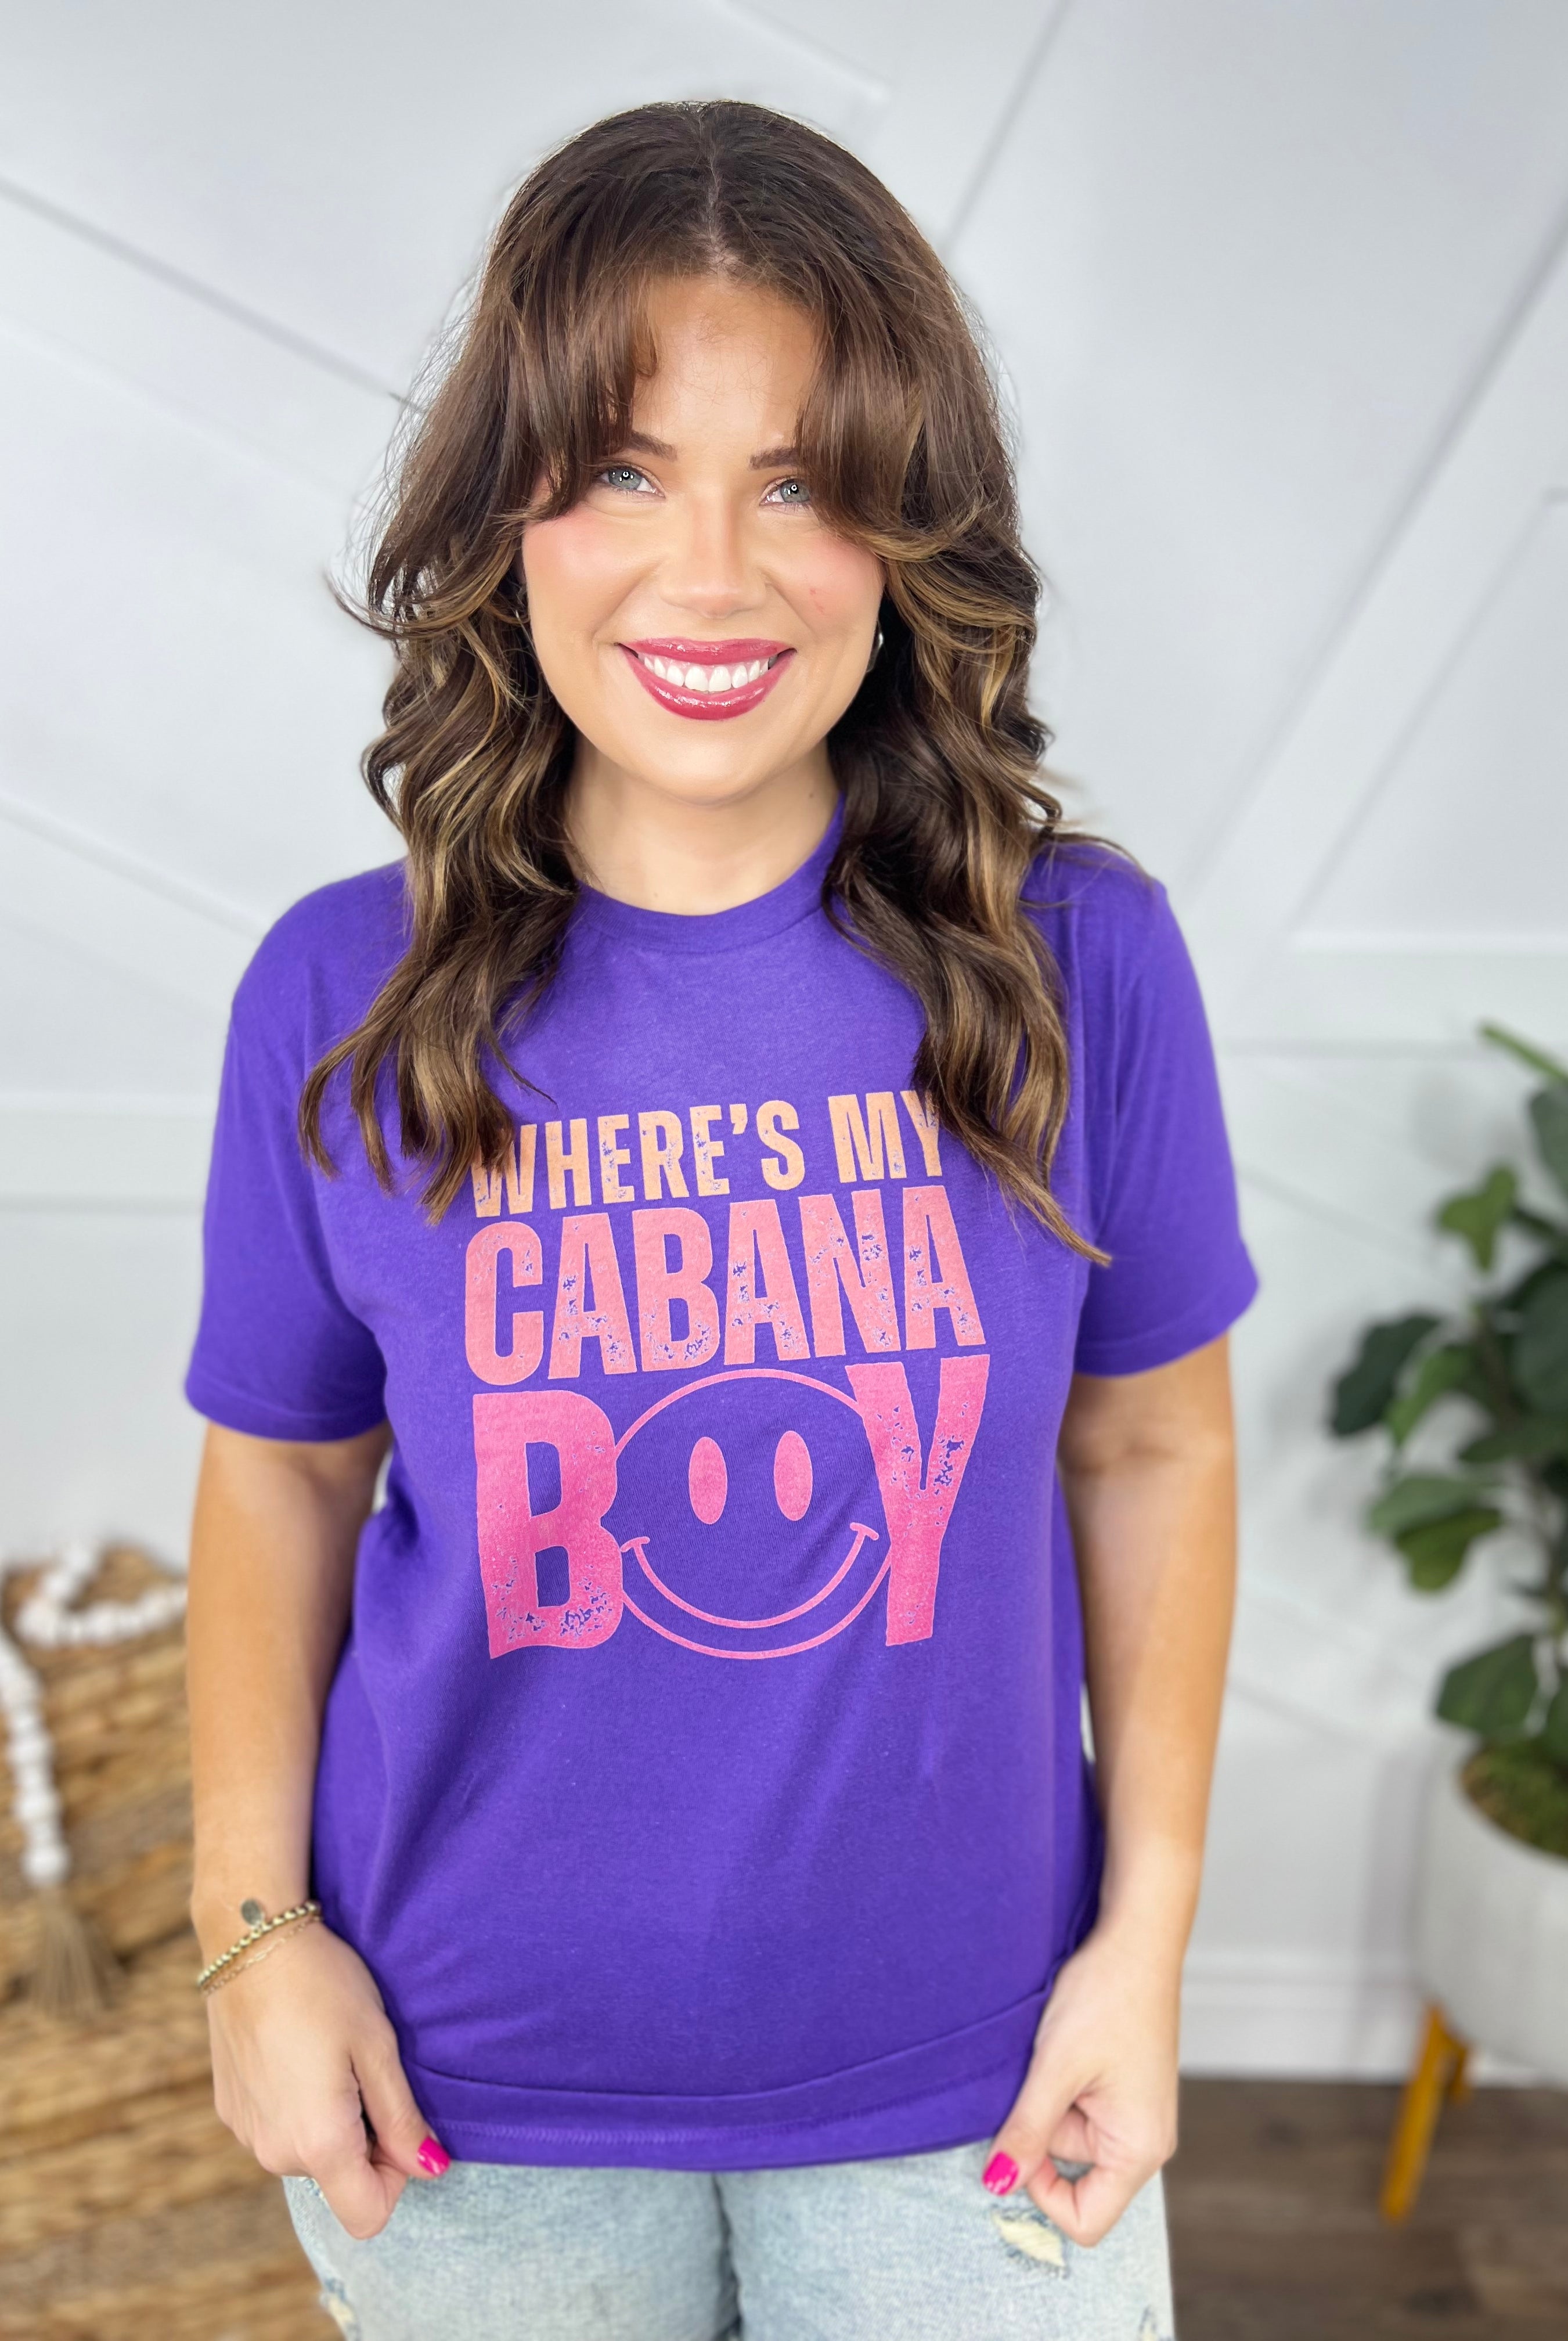 Cabana Boy Graphic Tee-130 Graphic Tees-Heathered Boho-Heathered Boho Boutique, Women's Fashion and Accessories in Palmetto, FL